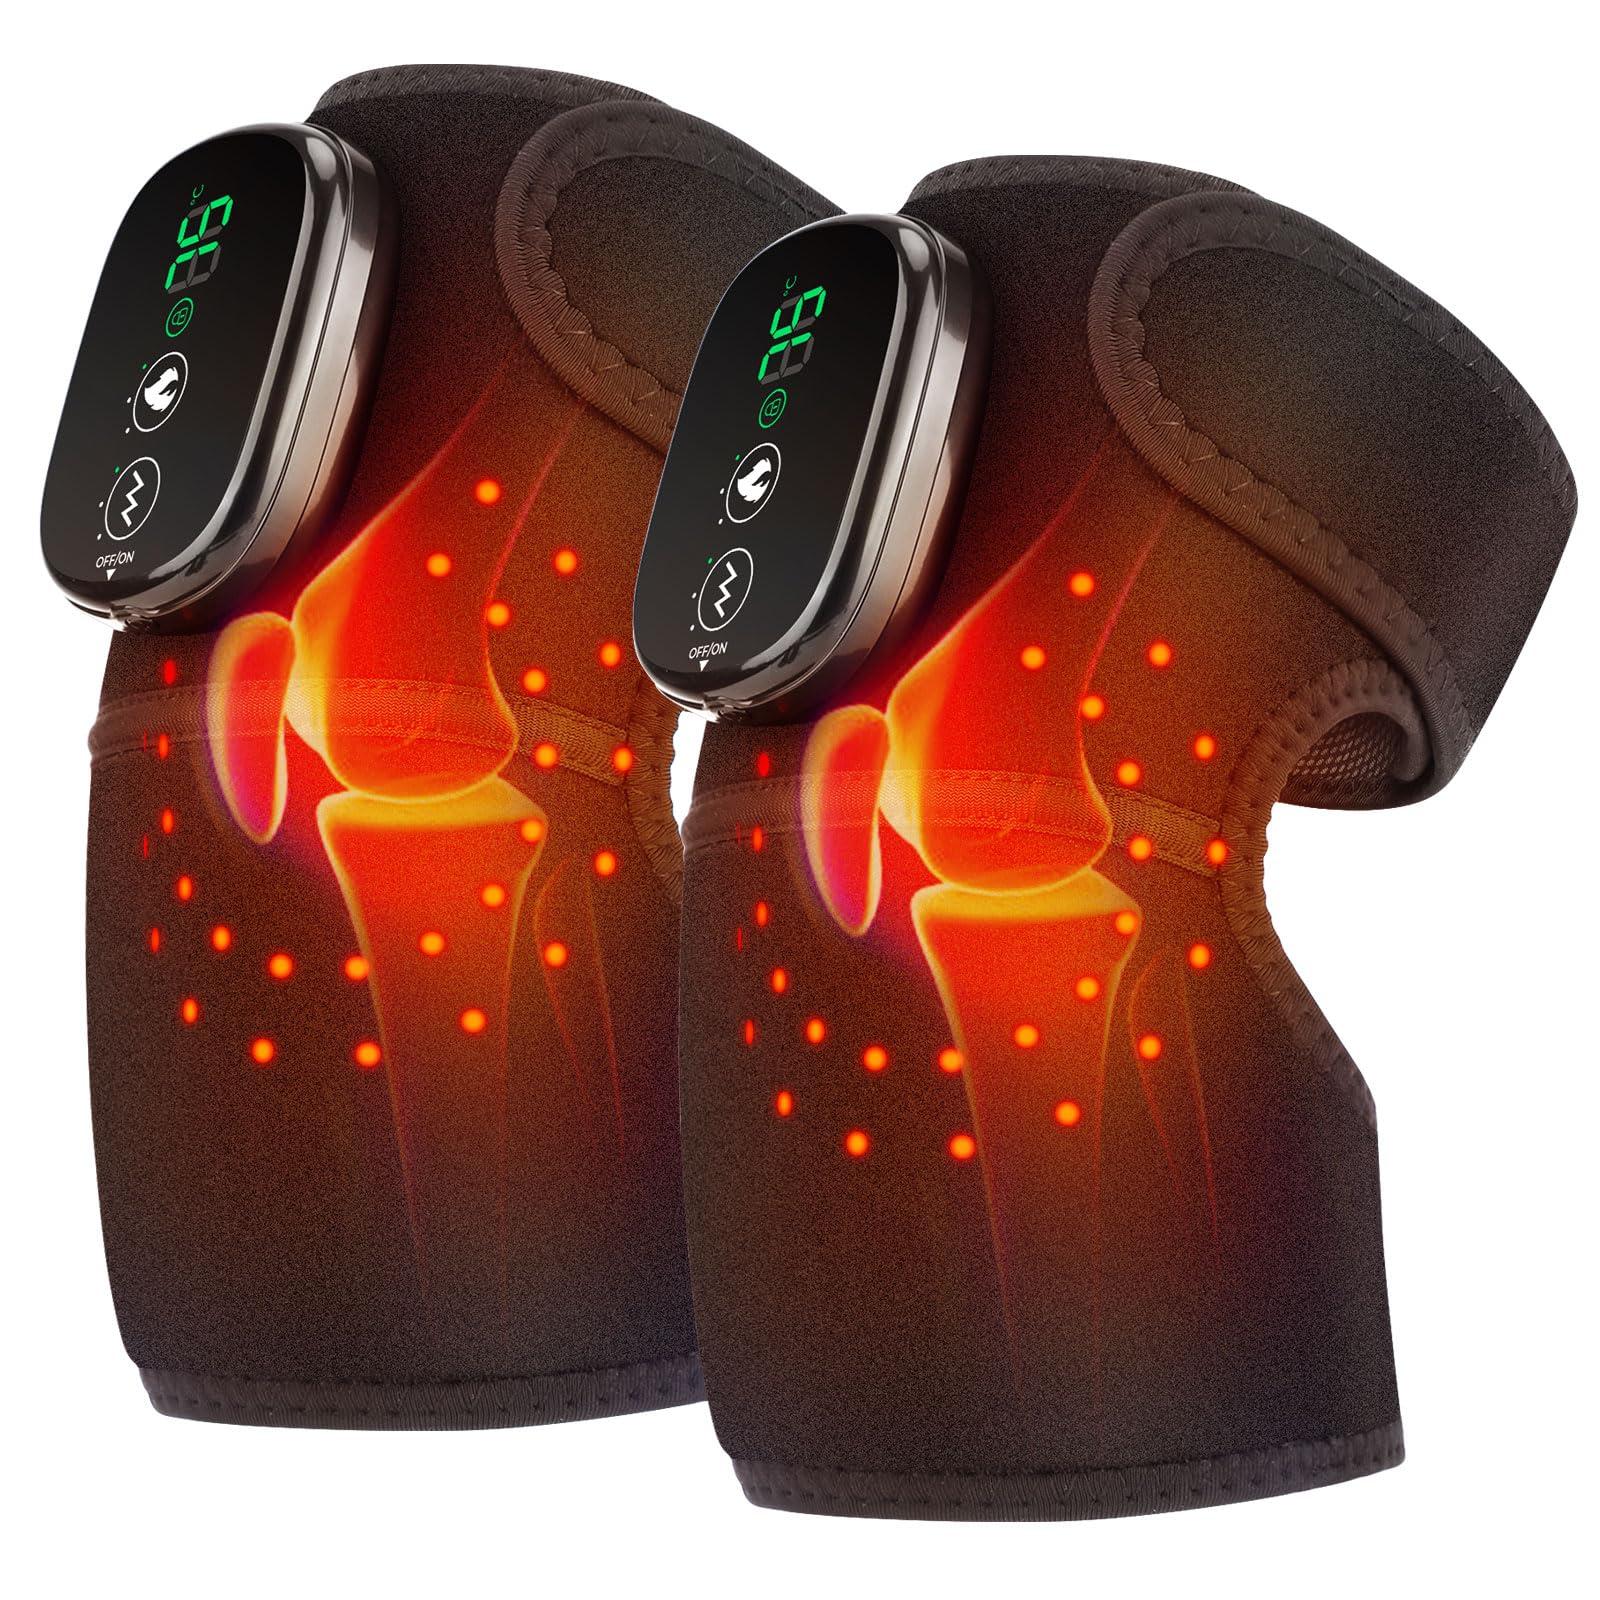 AFDEAL Heated Knee Massager with Red Light, Cordless Red Light Heated Knee Warp With Vibration, 3 Modes Heated Knee Support,Heated Knee Pad for Shoulder Elbow Knee, 2 Pack, Black